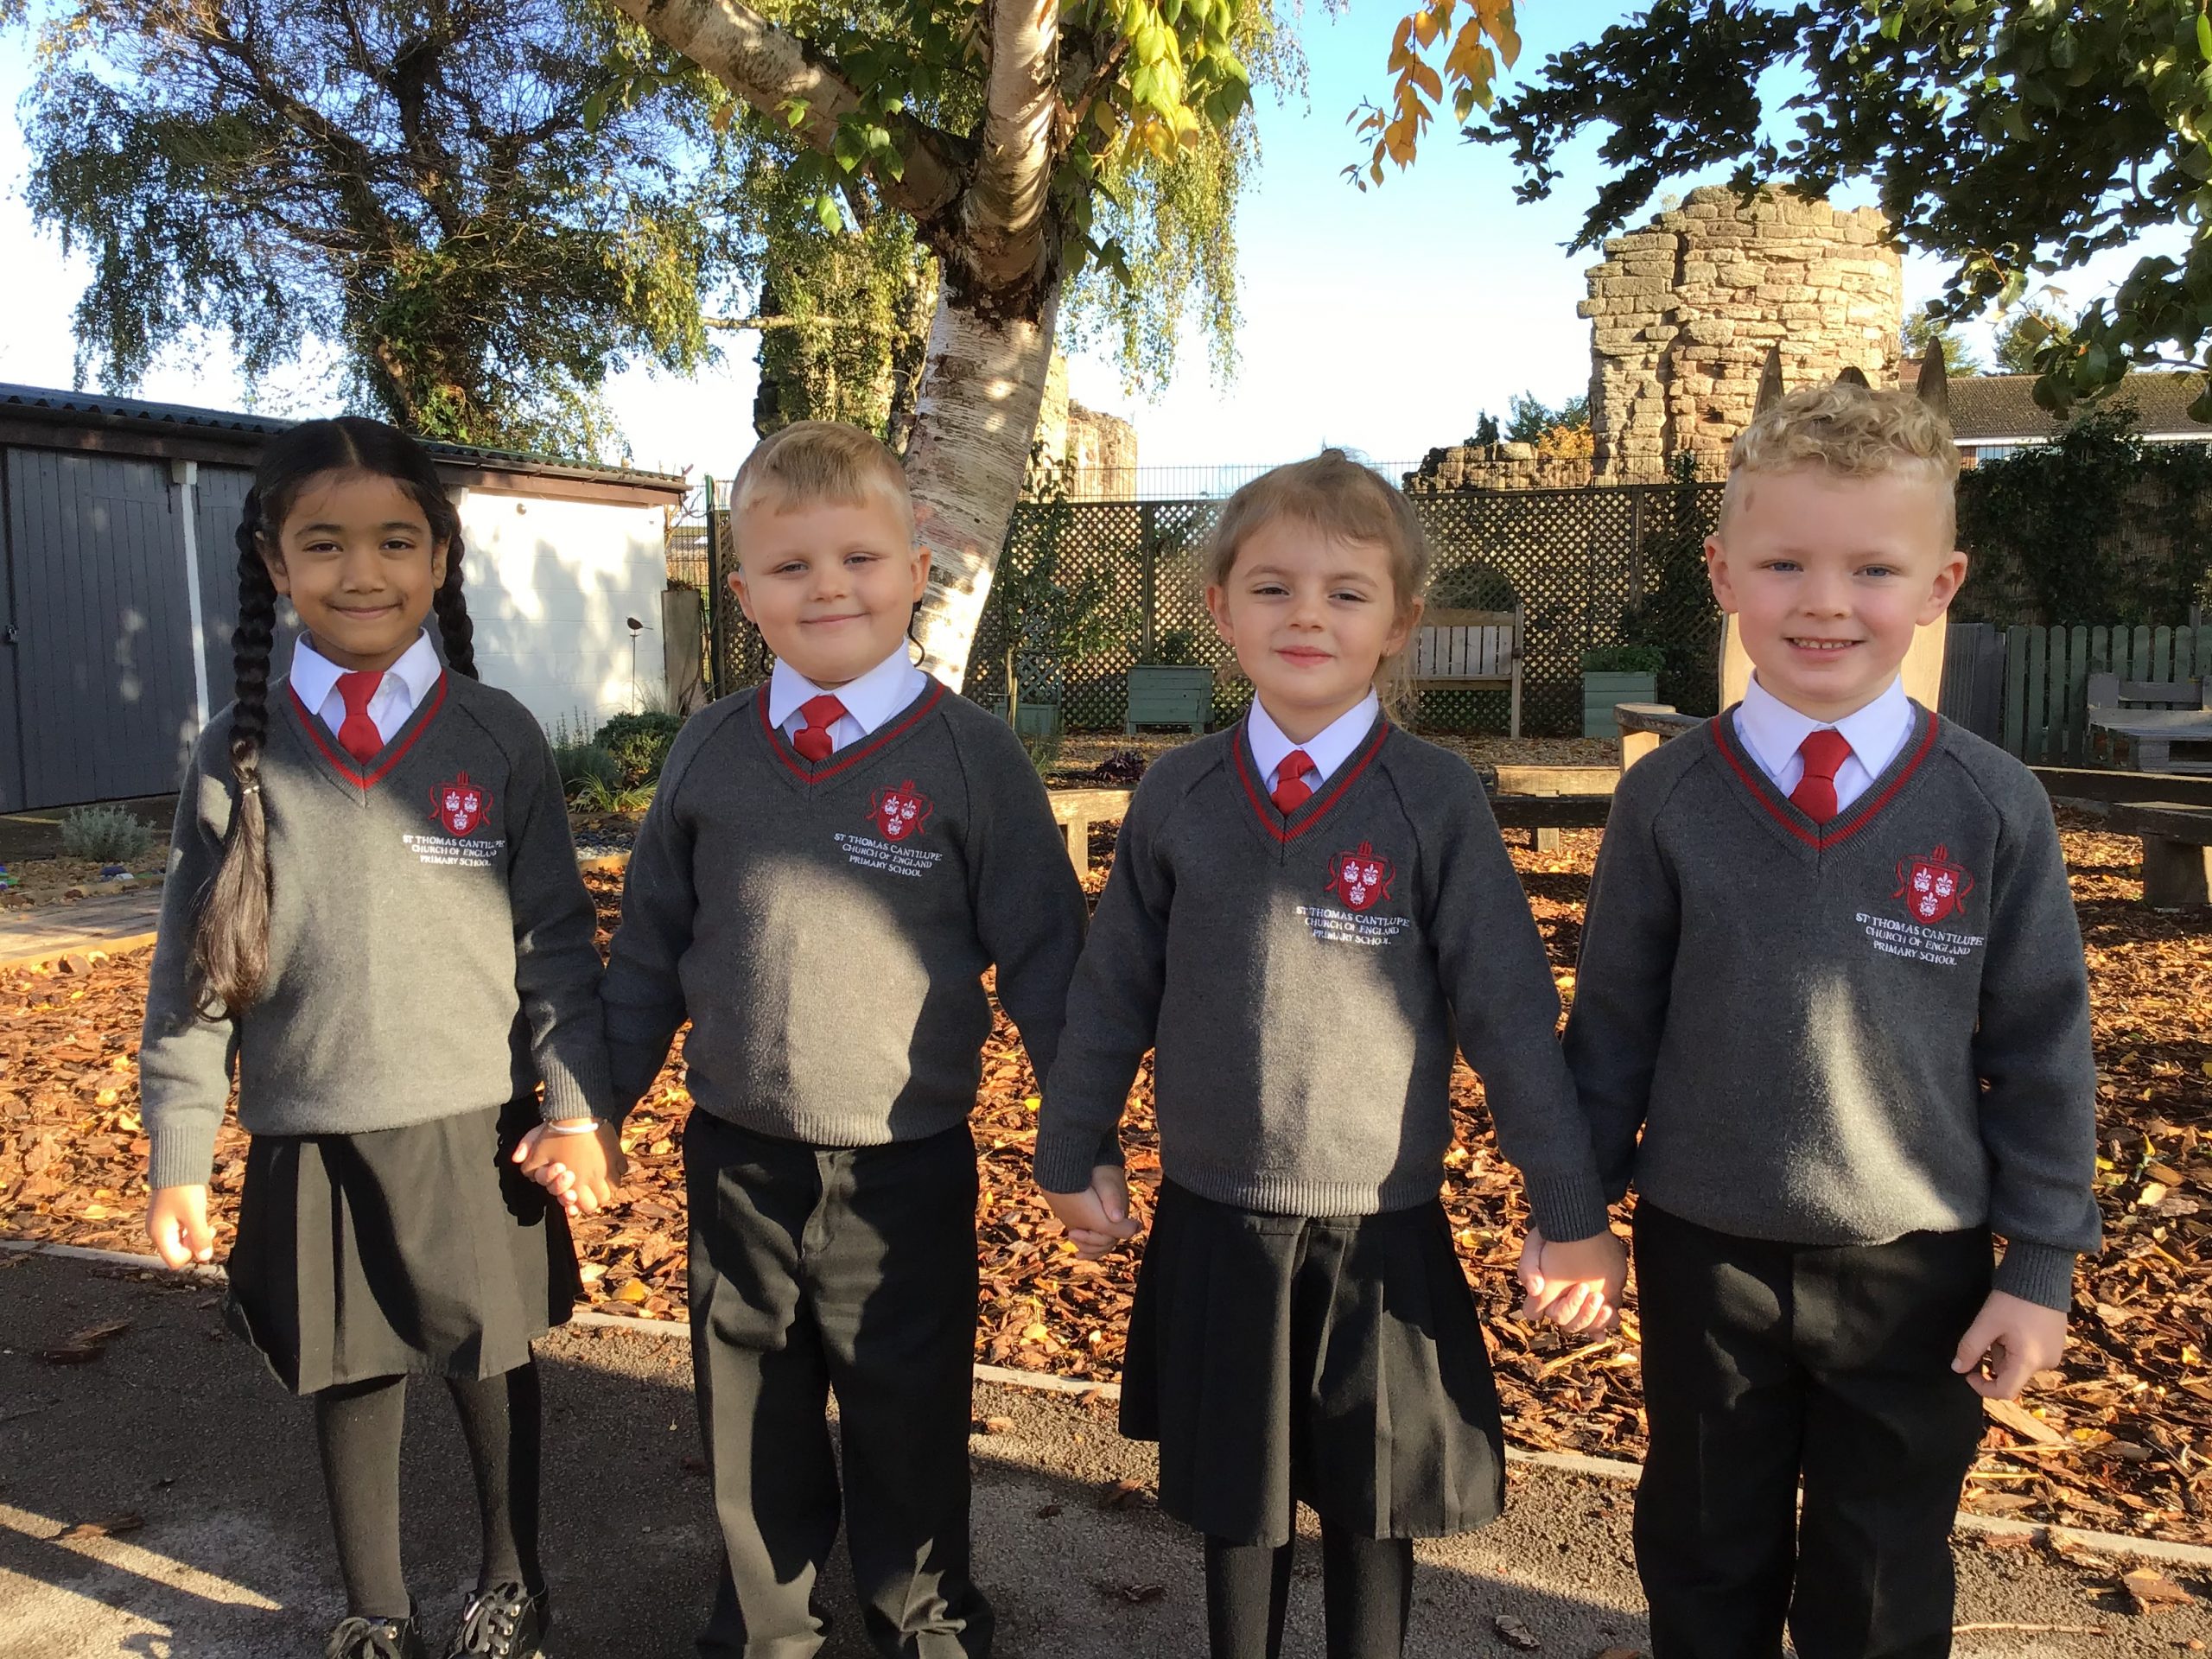 NEWS | St Thomas Cantilupe CE Primary School has been judged ‘good’ in all areas by Ofsted